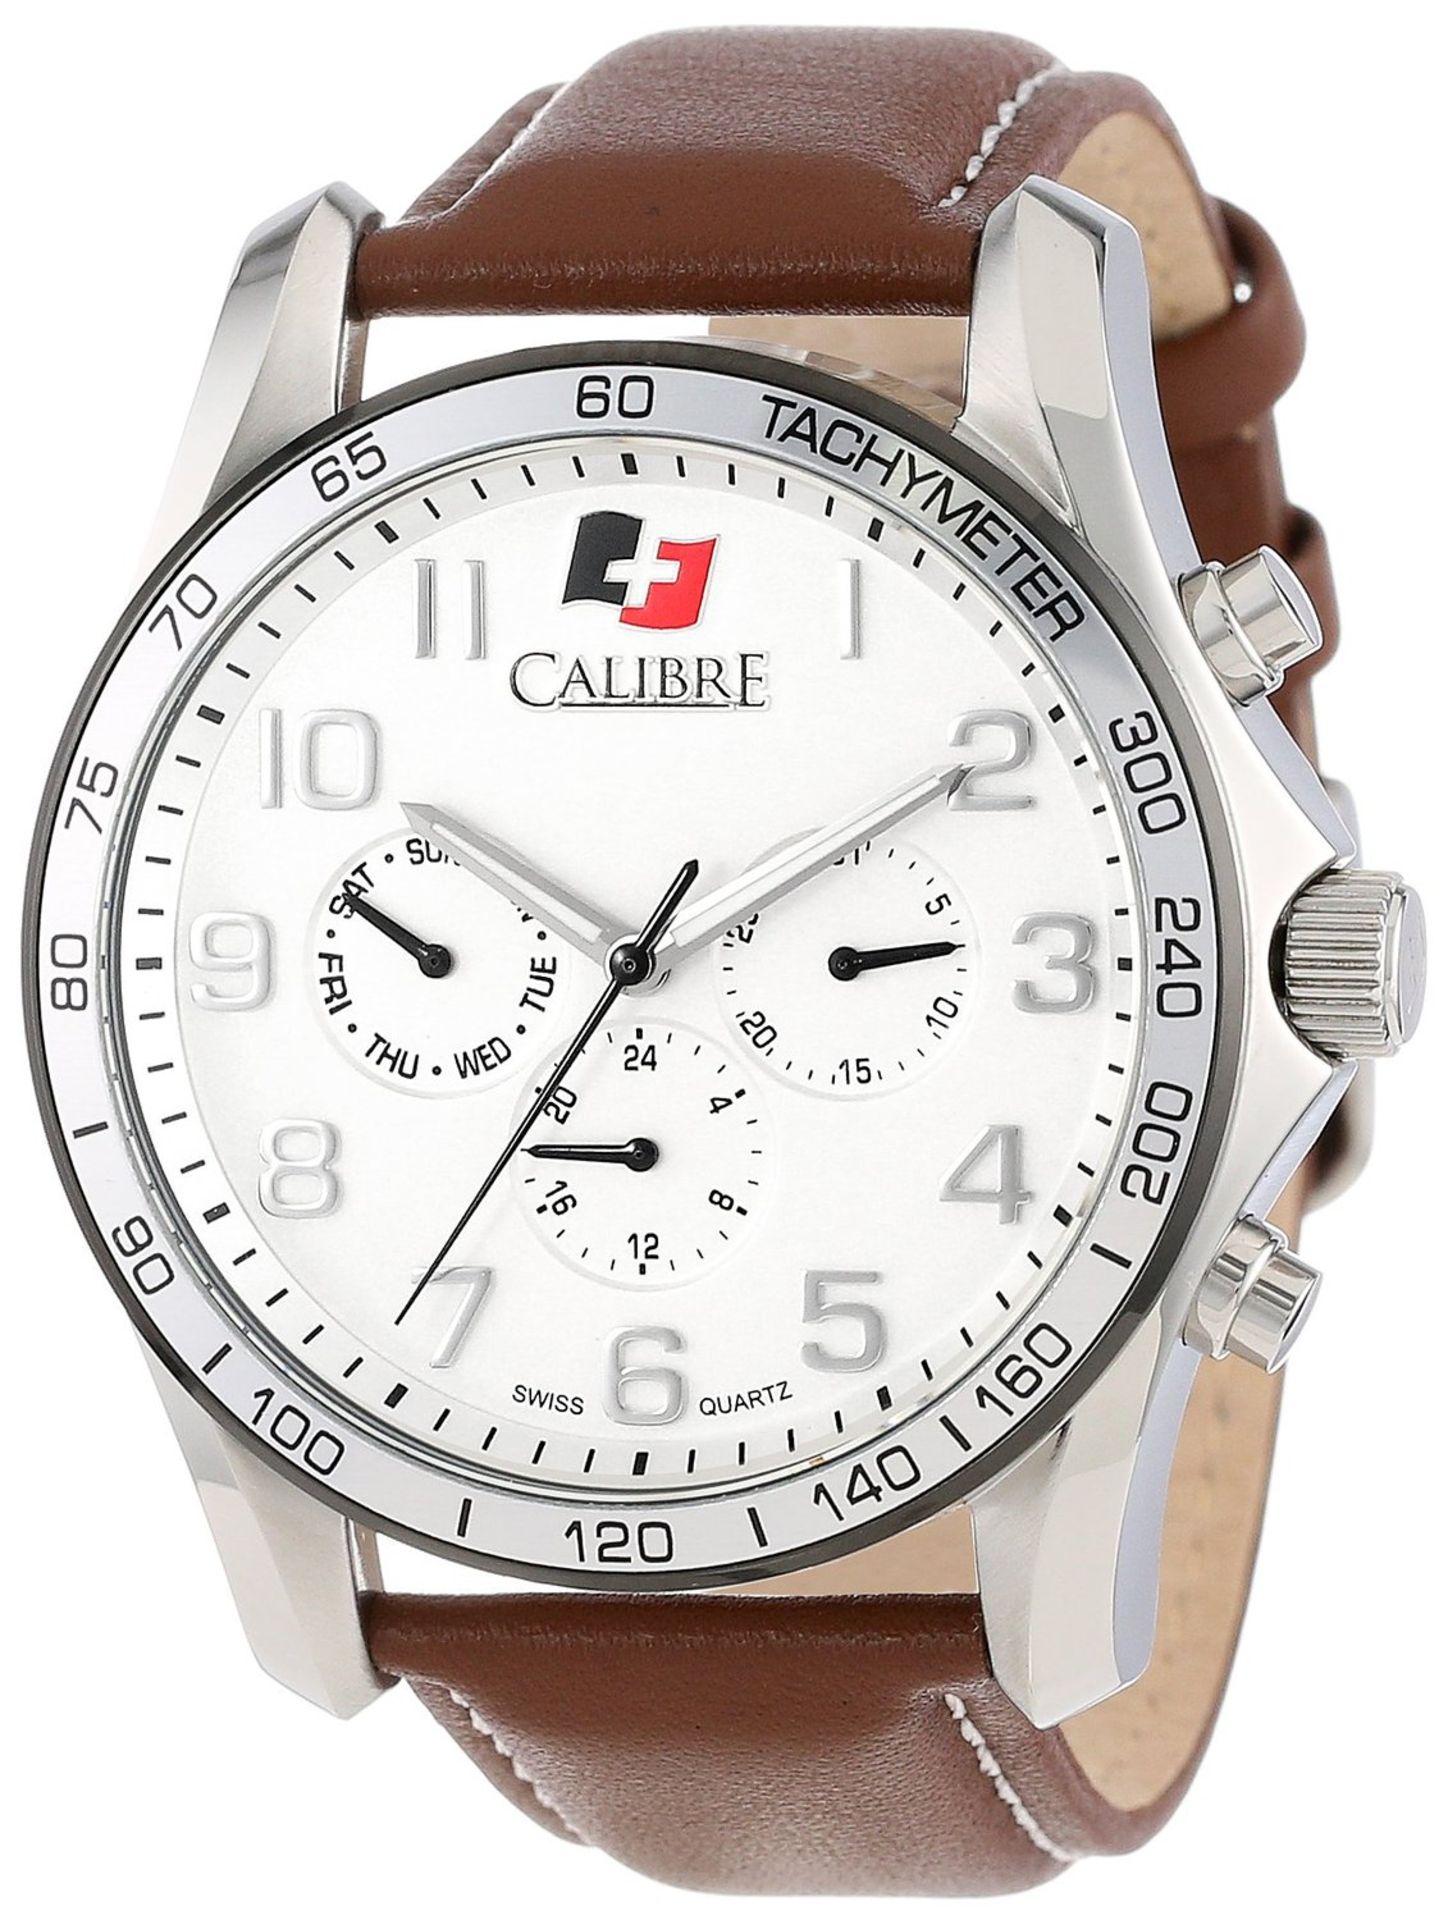 Calibre Men's SC-4B1-04-001.7 "Buffalo" Stainless Steel and Brown Leather Watch– BRAND NEW,